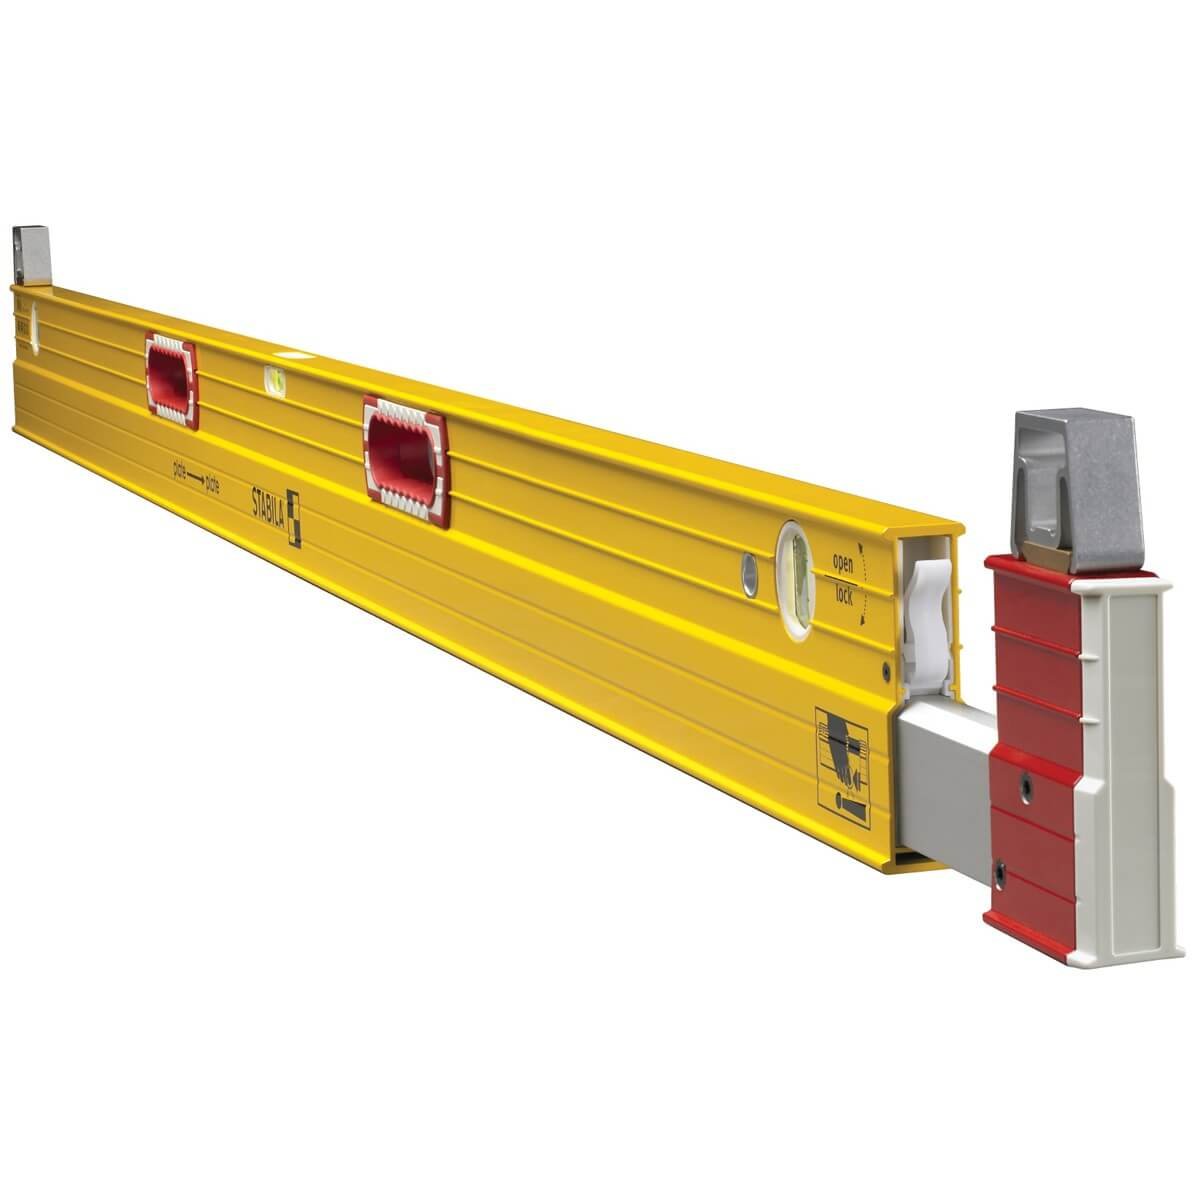 Stabila 35610 Extendable (6 to 10 foot) Plate to Plate Level